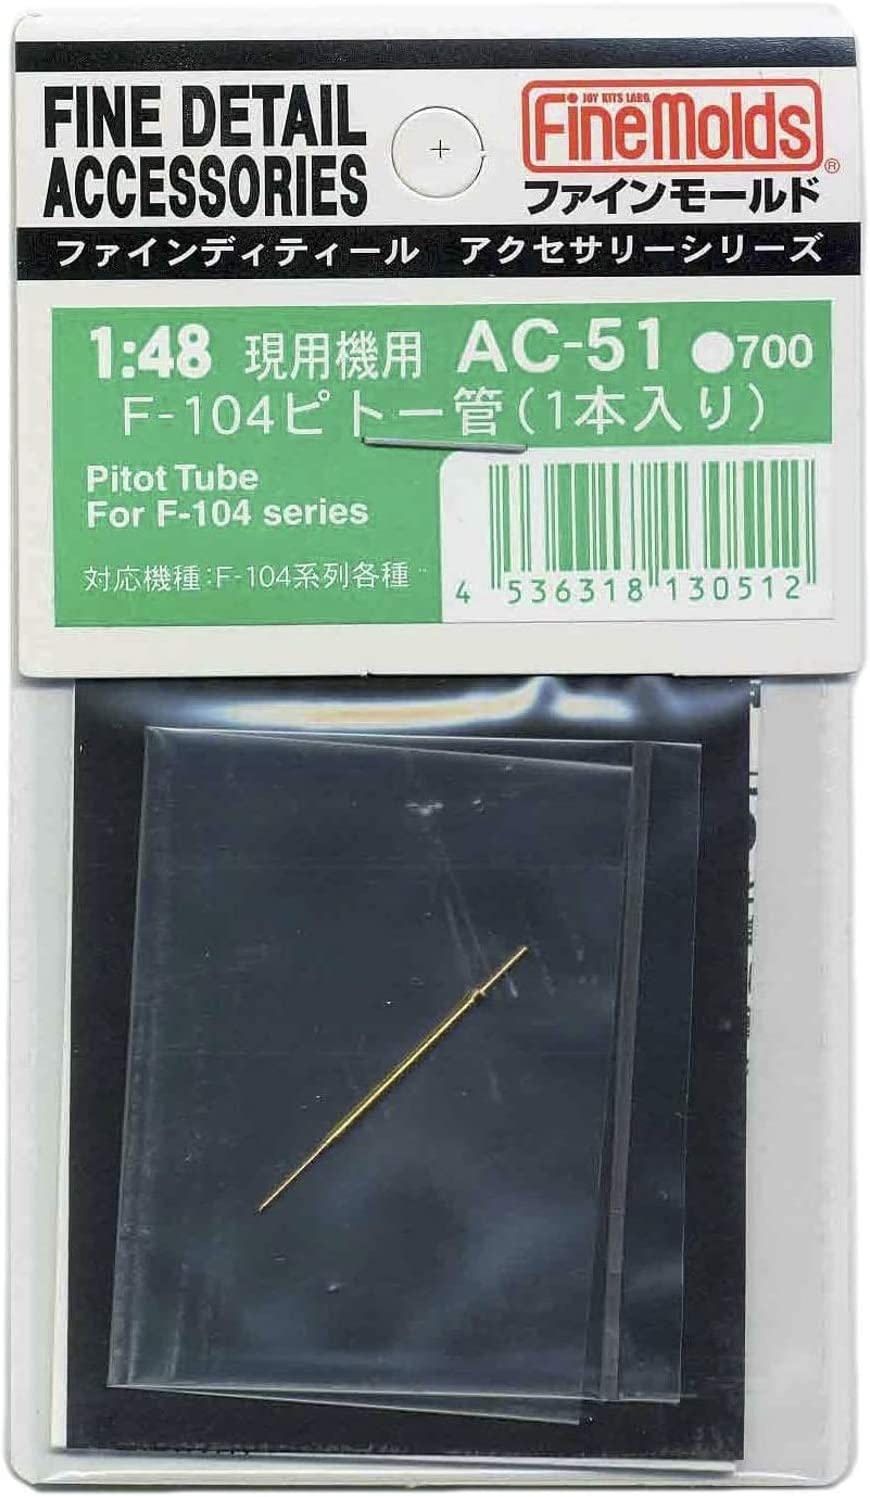 Pitot Tube Set for F-104 Series (1 Piece)